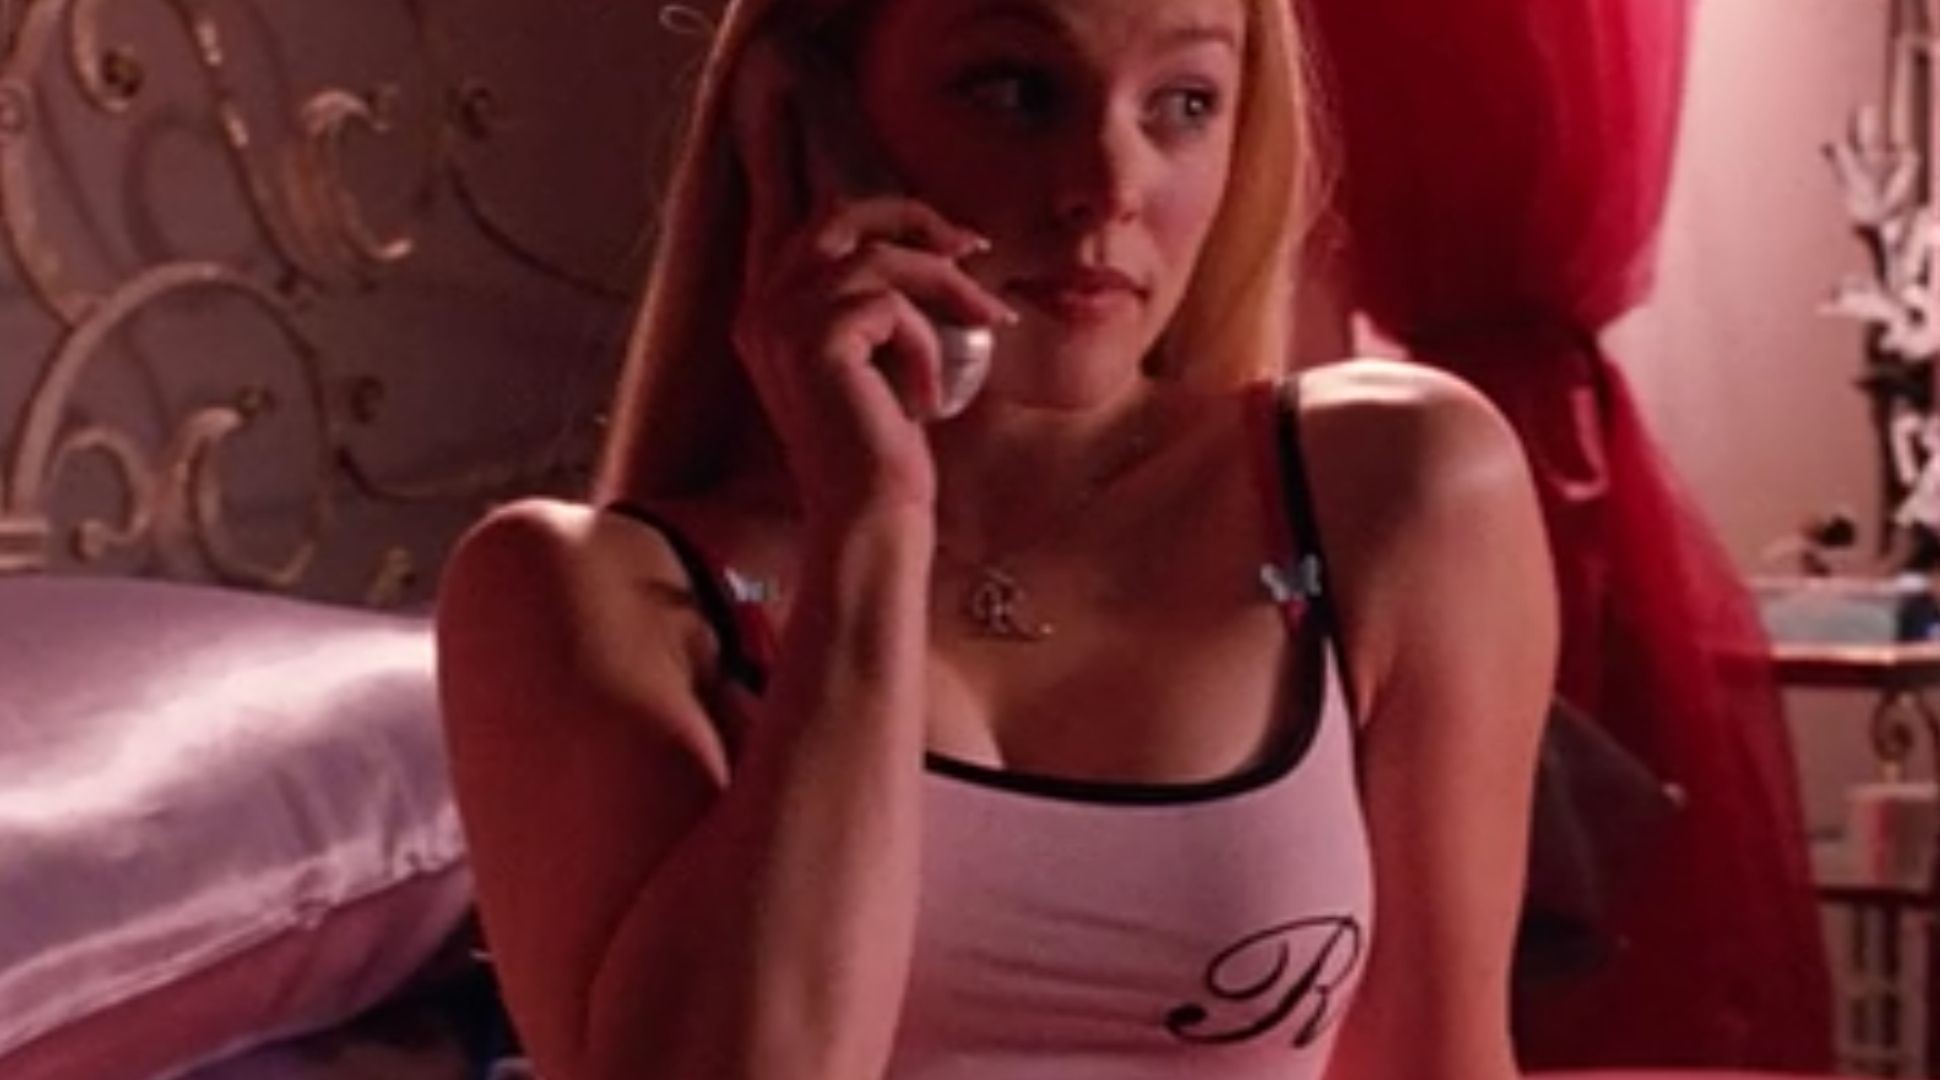 Mean Girls': the Most Iconic Fashion Looks From Movie